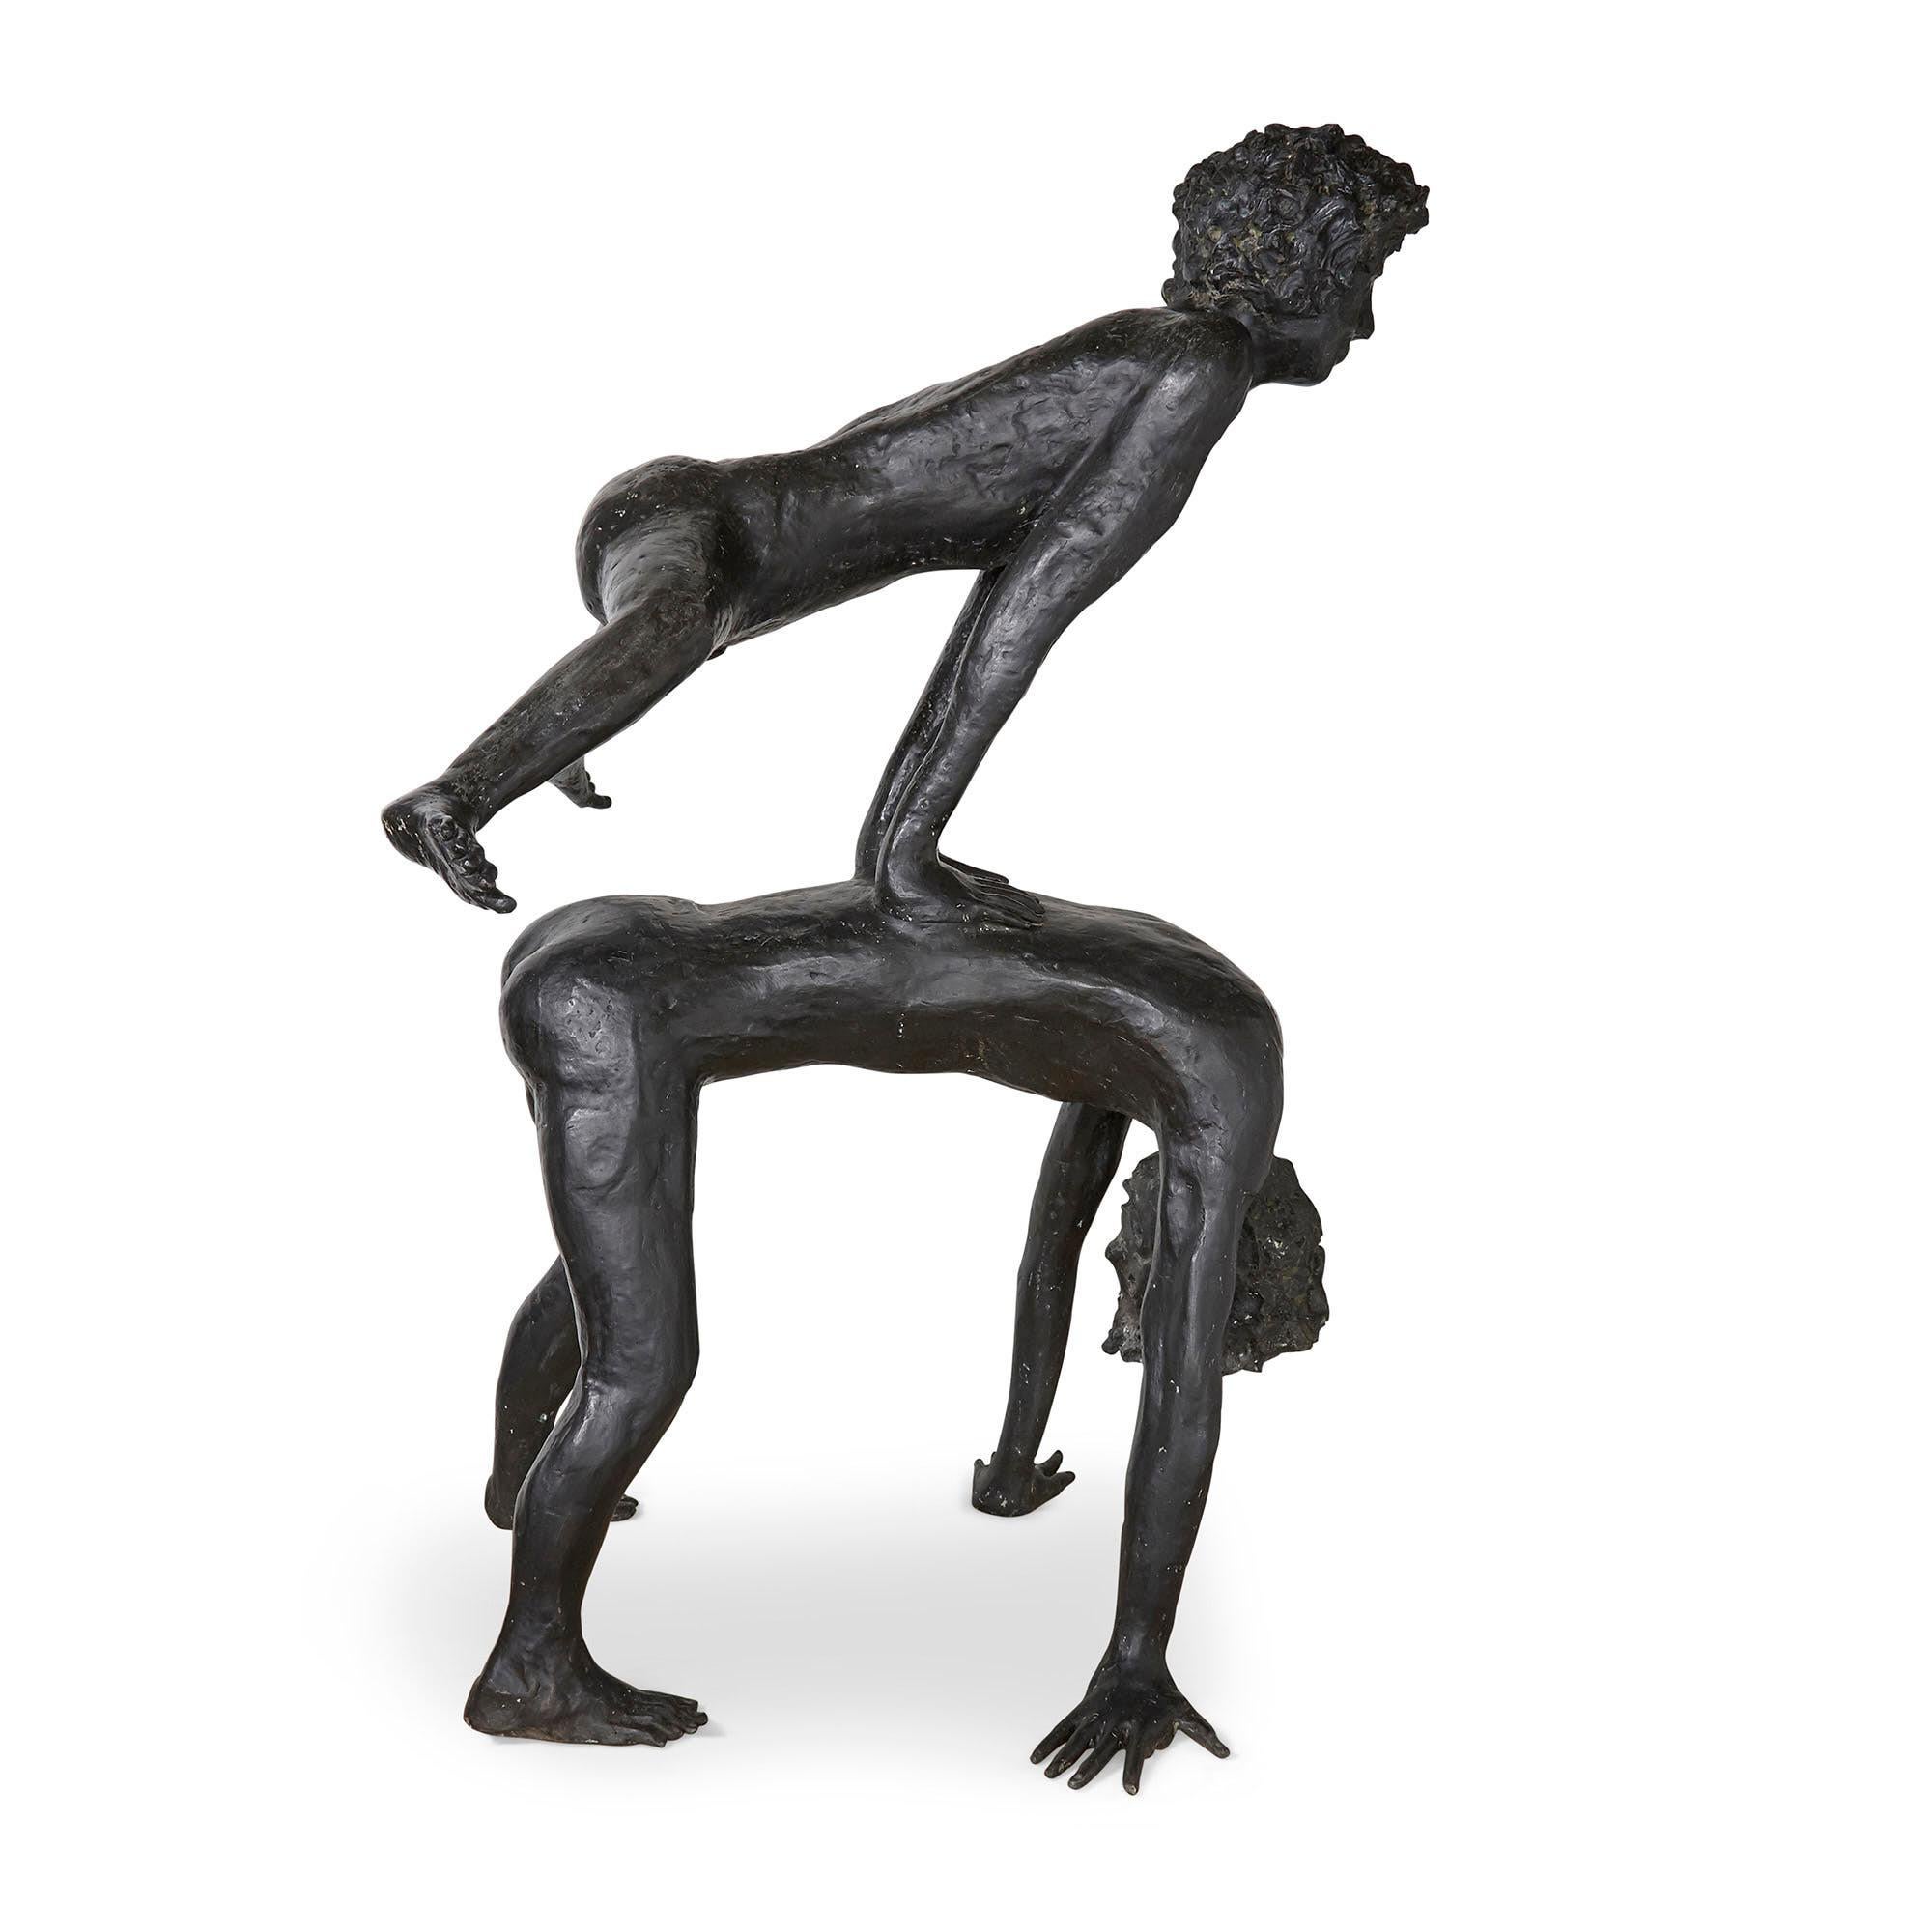 Large patinated bronze sculptural group by Philippe Berry
French, late 20th century
Measures: Height 150cm, width 90cm, depth 128cm

This fine and expressive patinated bronze sculpture by the contemporary French sculptor Philippe Berry depicts